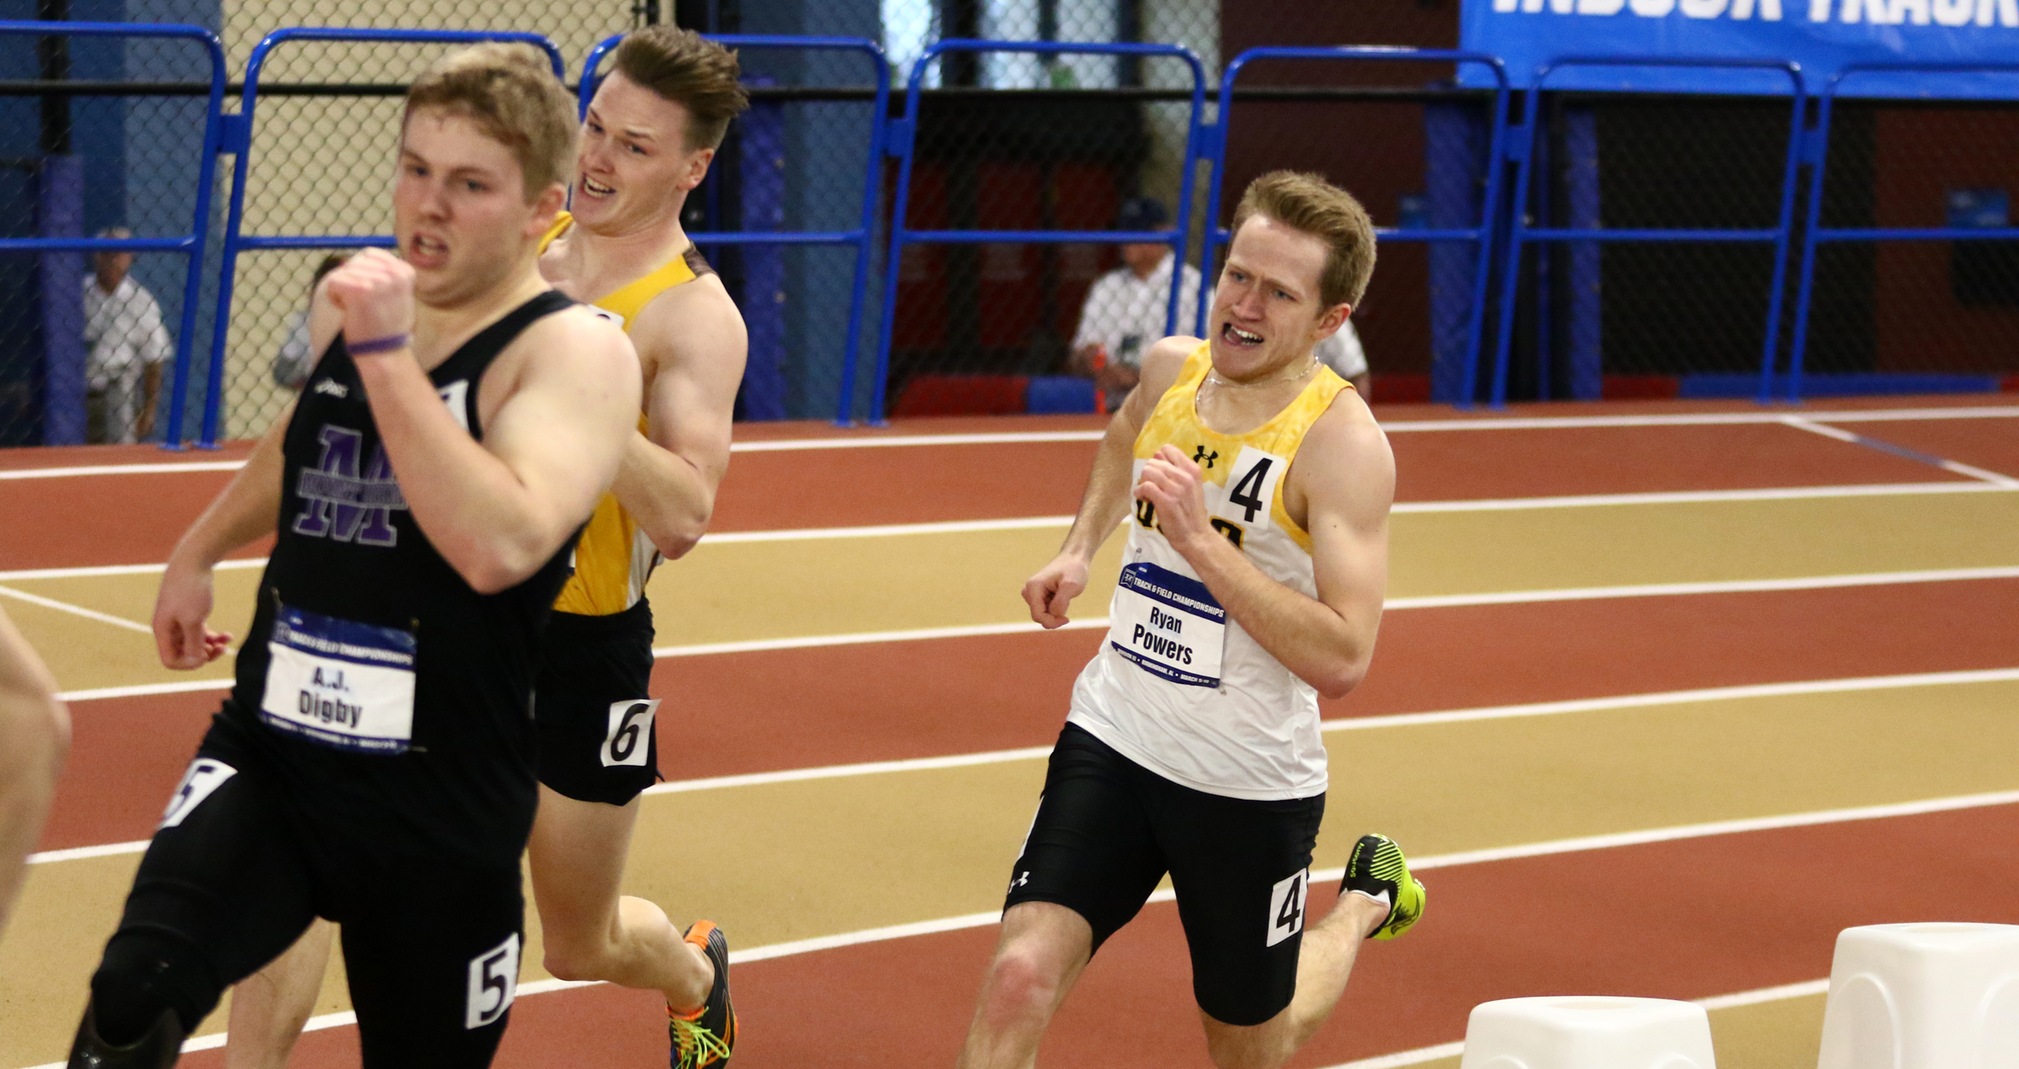 Ryan Powers finished sixth in the 400-meter run and 10th in the 200-meter dash at the NCAA Division III Indoor Track & Field Championships.